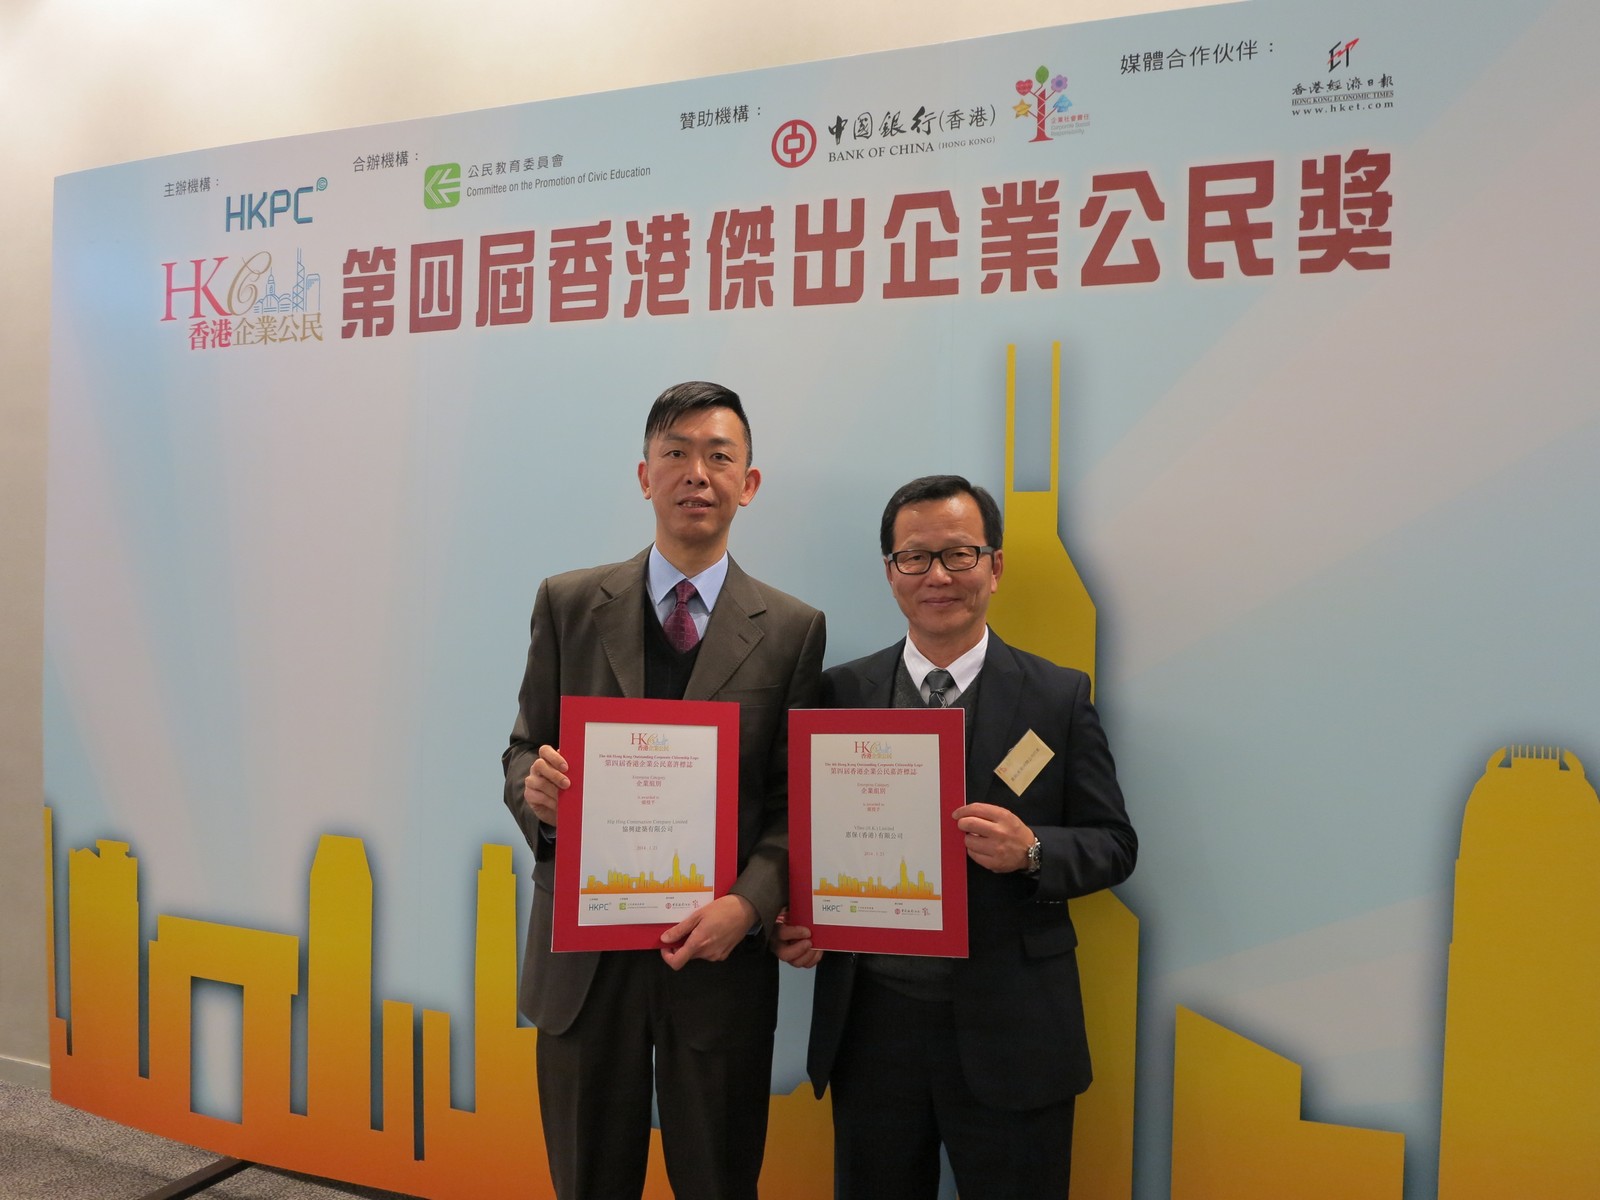 Mr KH Woo (Left), Executive Director of Hip Hing Construction Co., Ltd. and Mr CN Ngan (Right), Director of Vibro (H.K.) Ltd. accept the awards on behalf of the companies